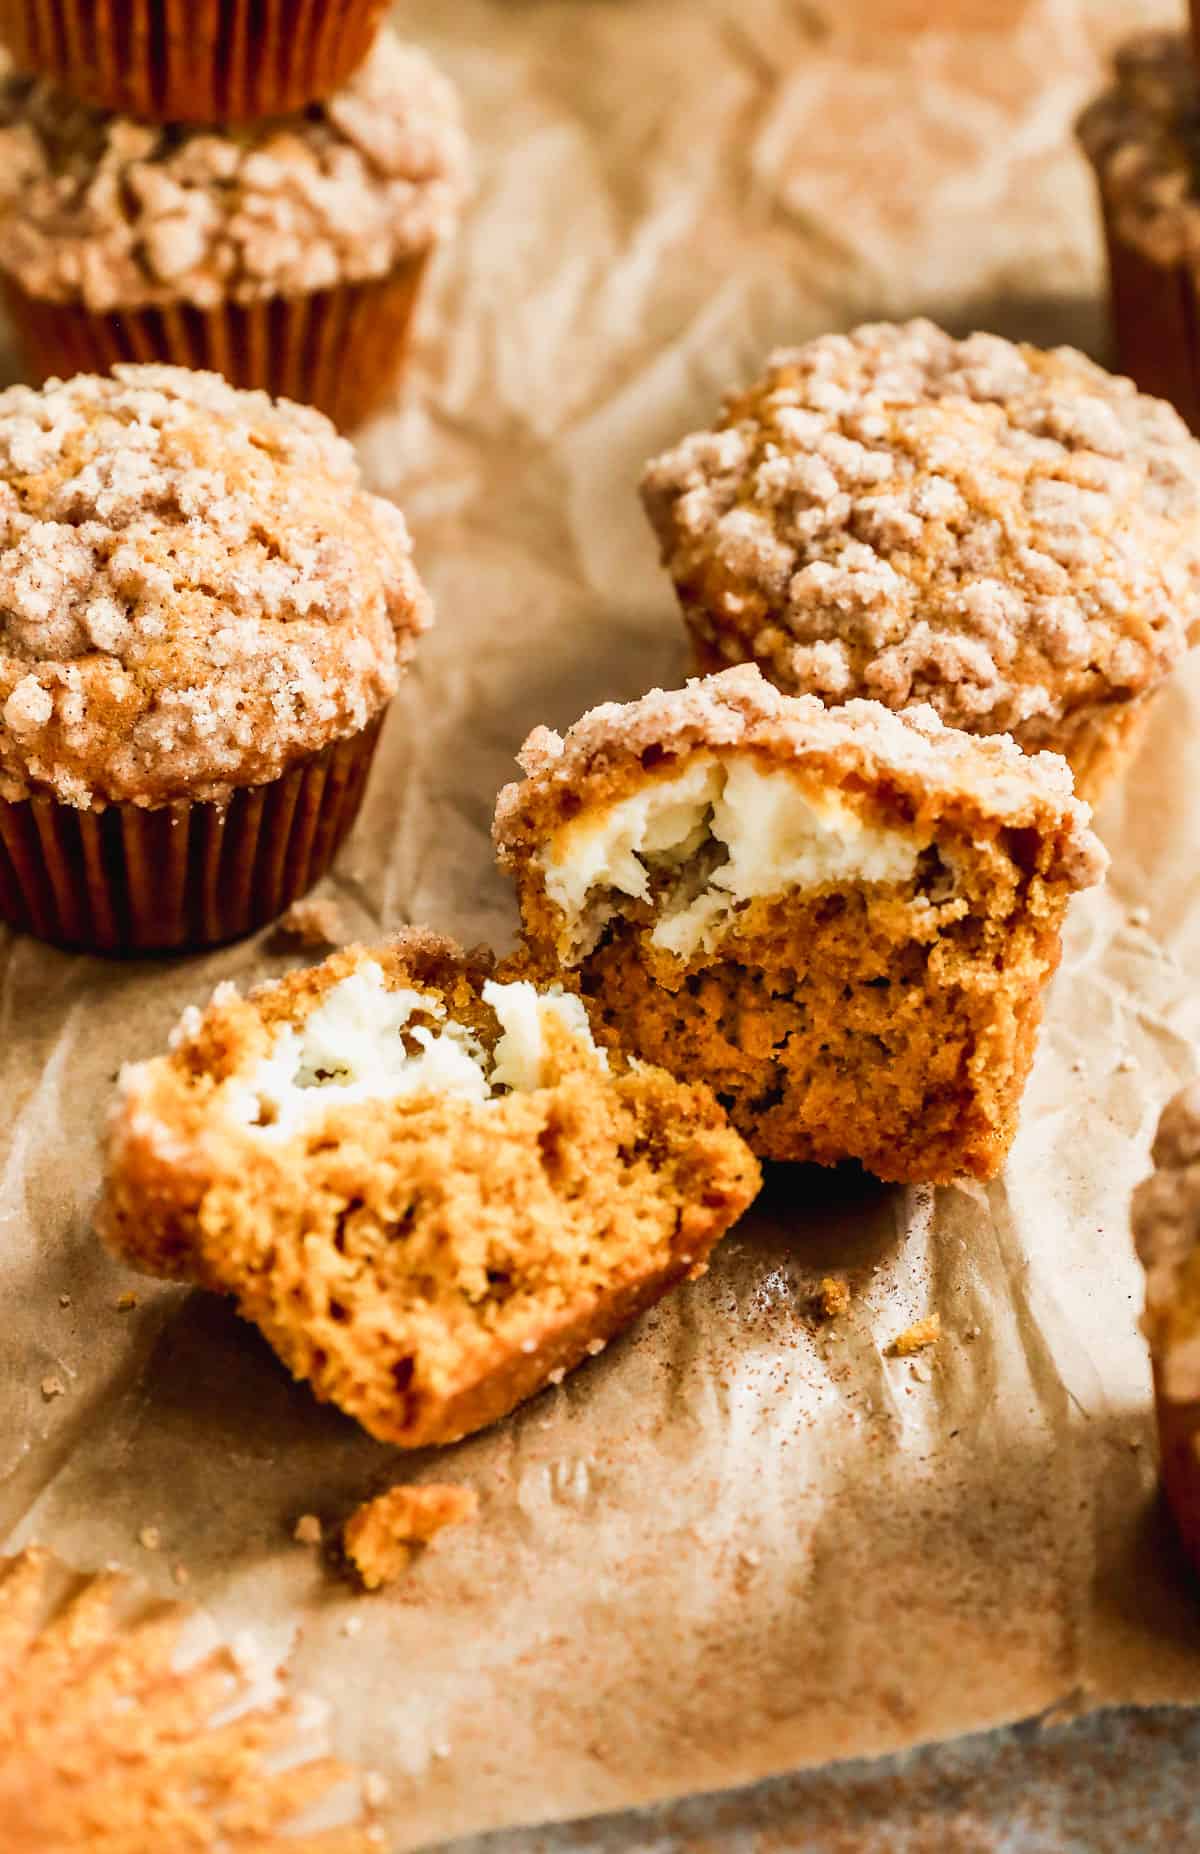 A close up image of a pumpkin cream cheese muffin sliced in half to show the baked cream cheese filling. 